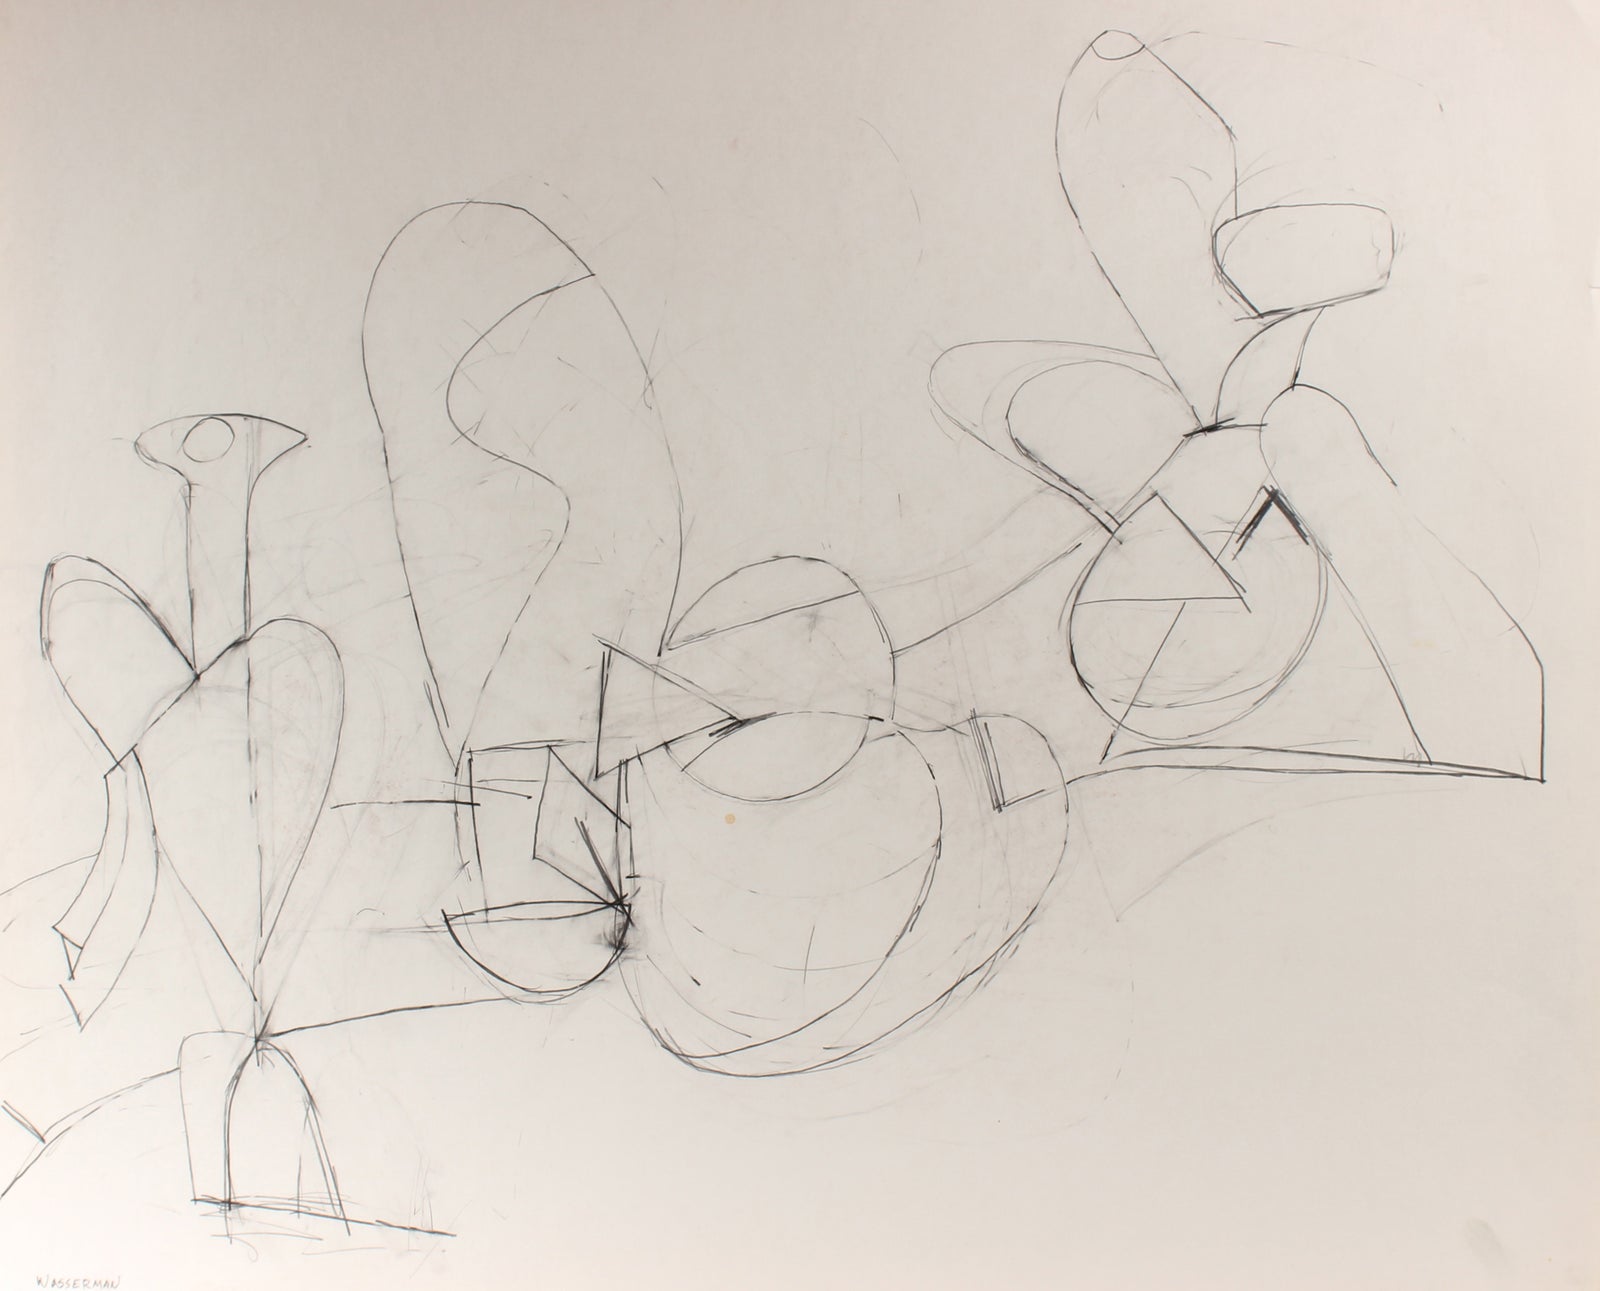 Minimalist Abstracted Figures<br>1998 Graphite<br><br>#88255